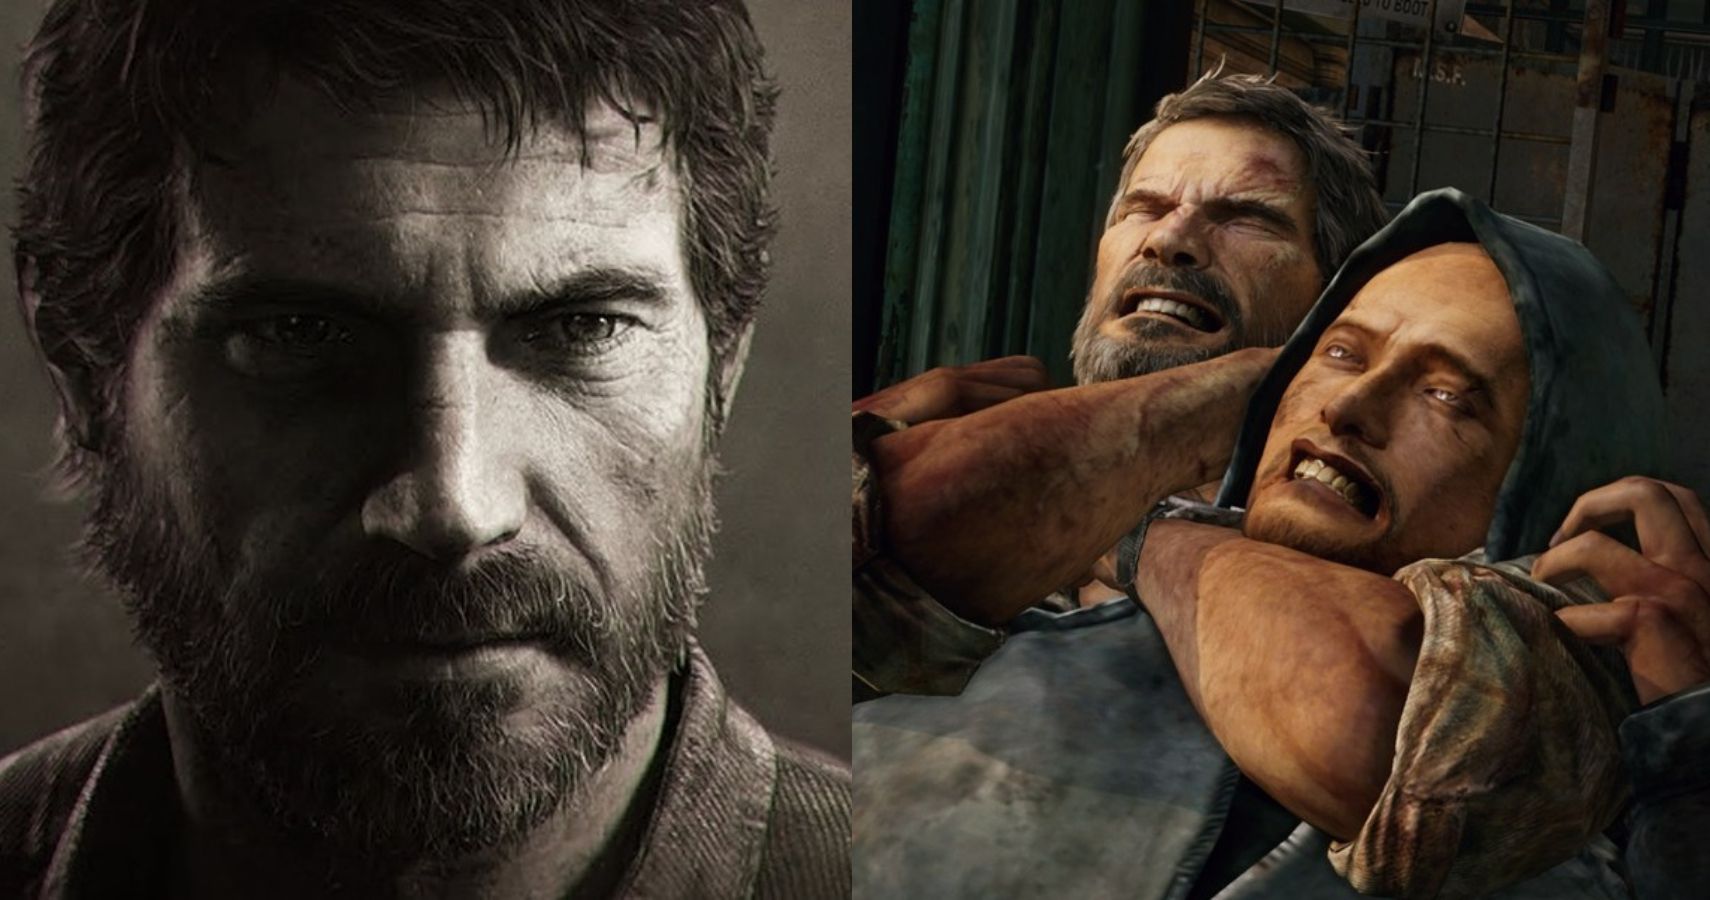 My little boy who's 10 watched me play through The Last of Us the other  day. Today he said 'why is Joel a bad guy when he started as a good guy'.